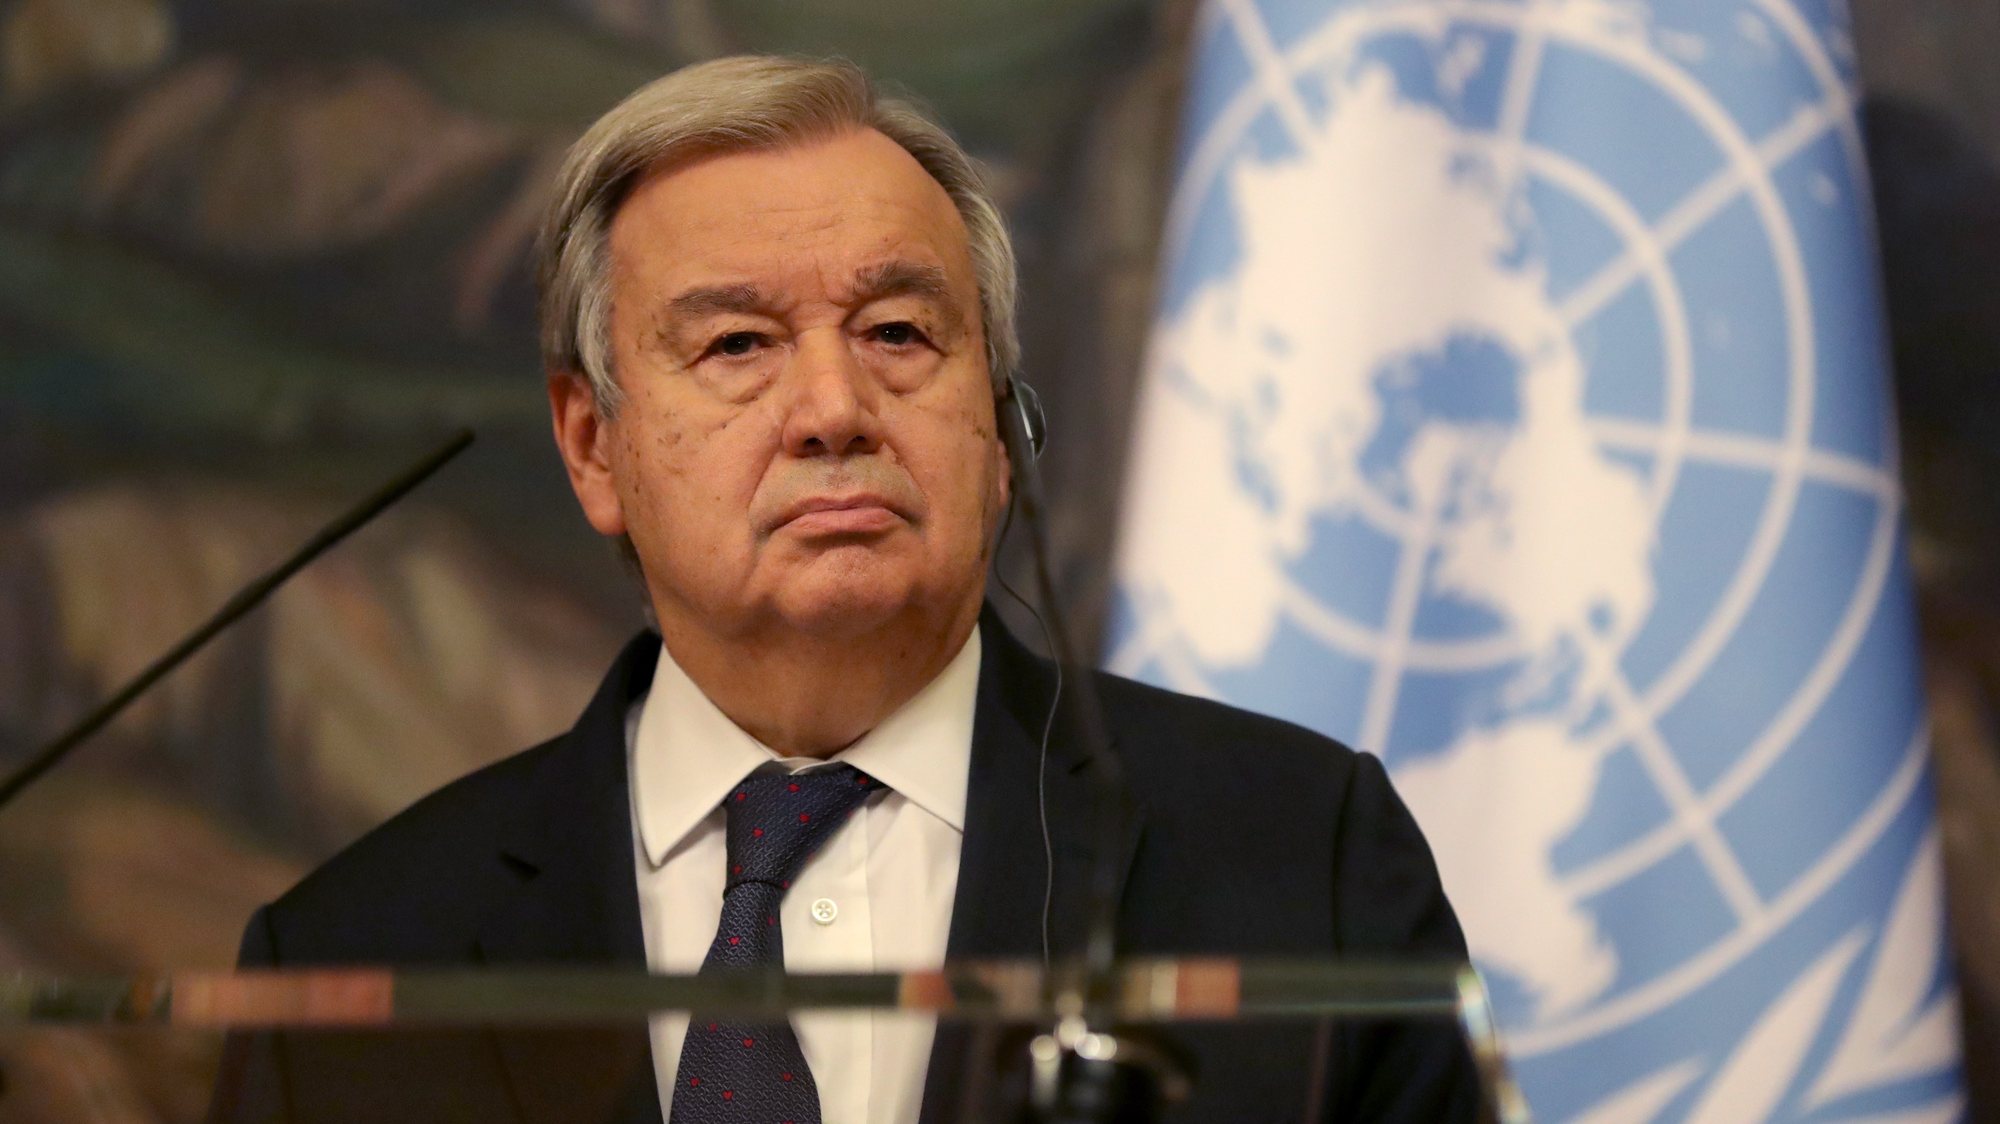 epa09909895 UN Secretary-General Antonio Guterres attends a press conference after his meeting with Russian Foreign Minister Lavrov in Moscow, Russia, 26 April 2022. The UN Secretary-General is on a working visit to Moscow.  EPA/MAXIM SHIPENKOV / POOL